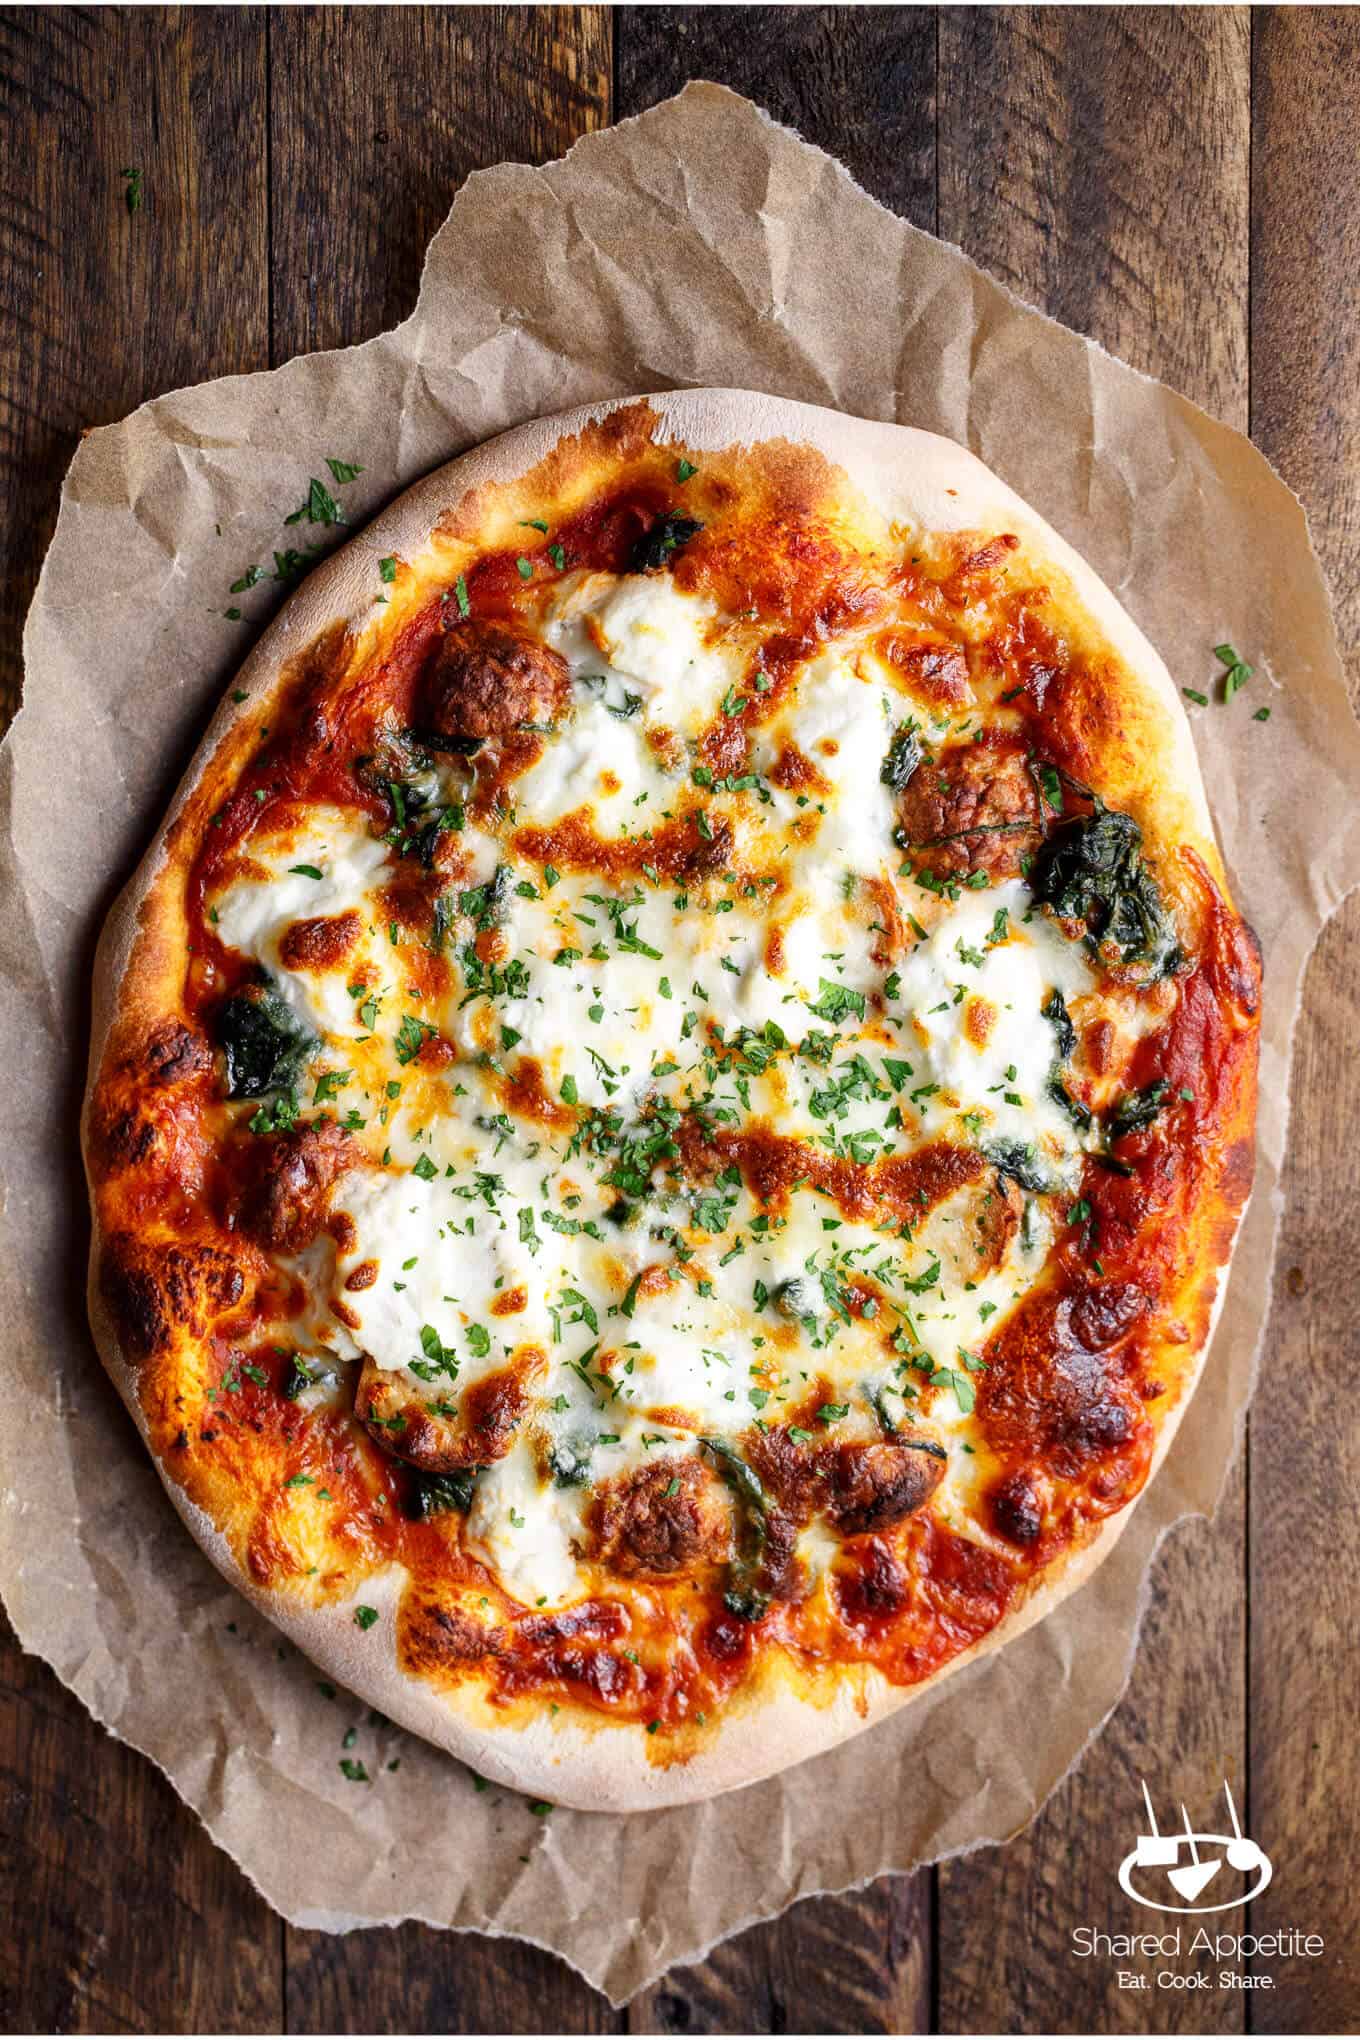 Meatball, Spinach, and Ricotta Pizza